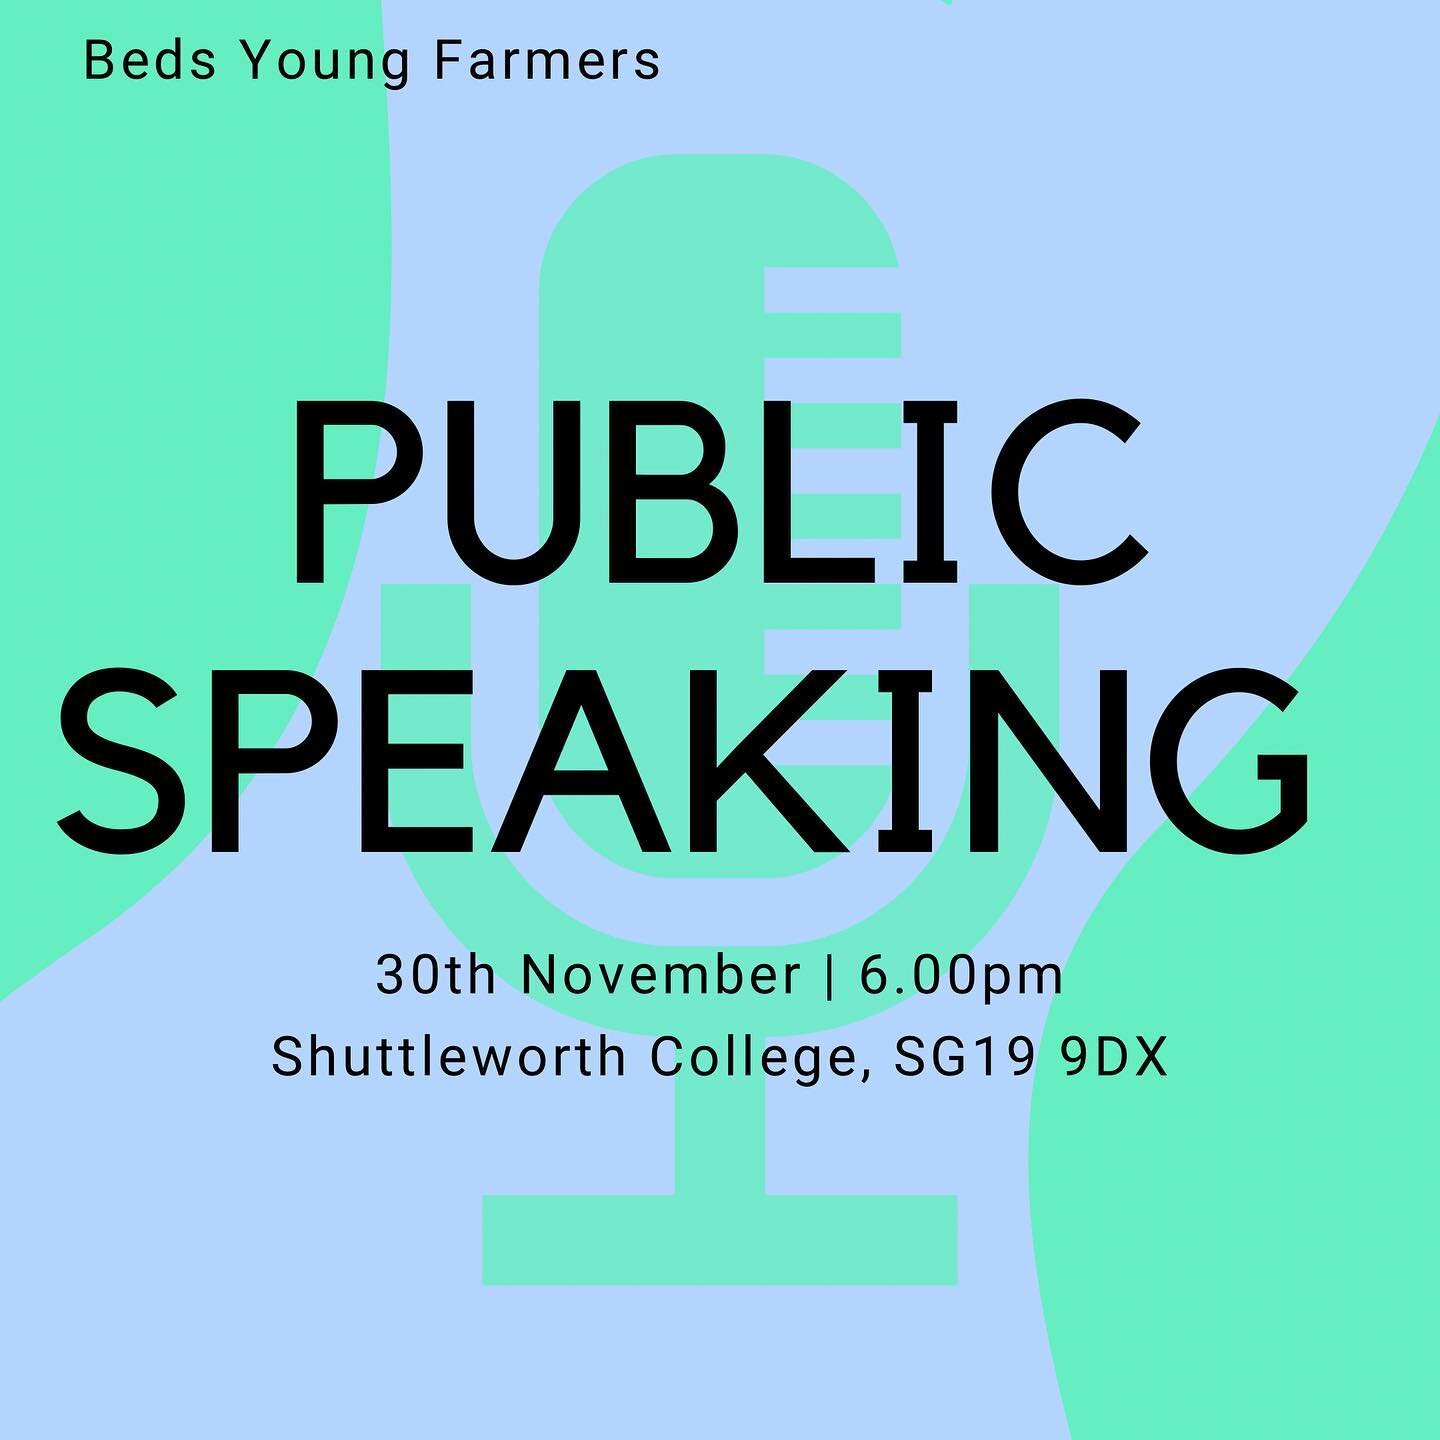 This weeks meeting is the Beds County Public Speaking Competition. Good Luck to all our Members competing!